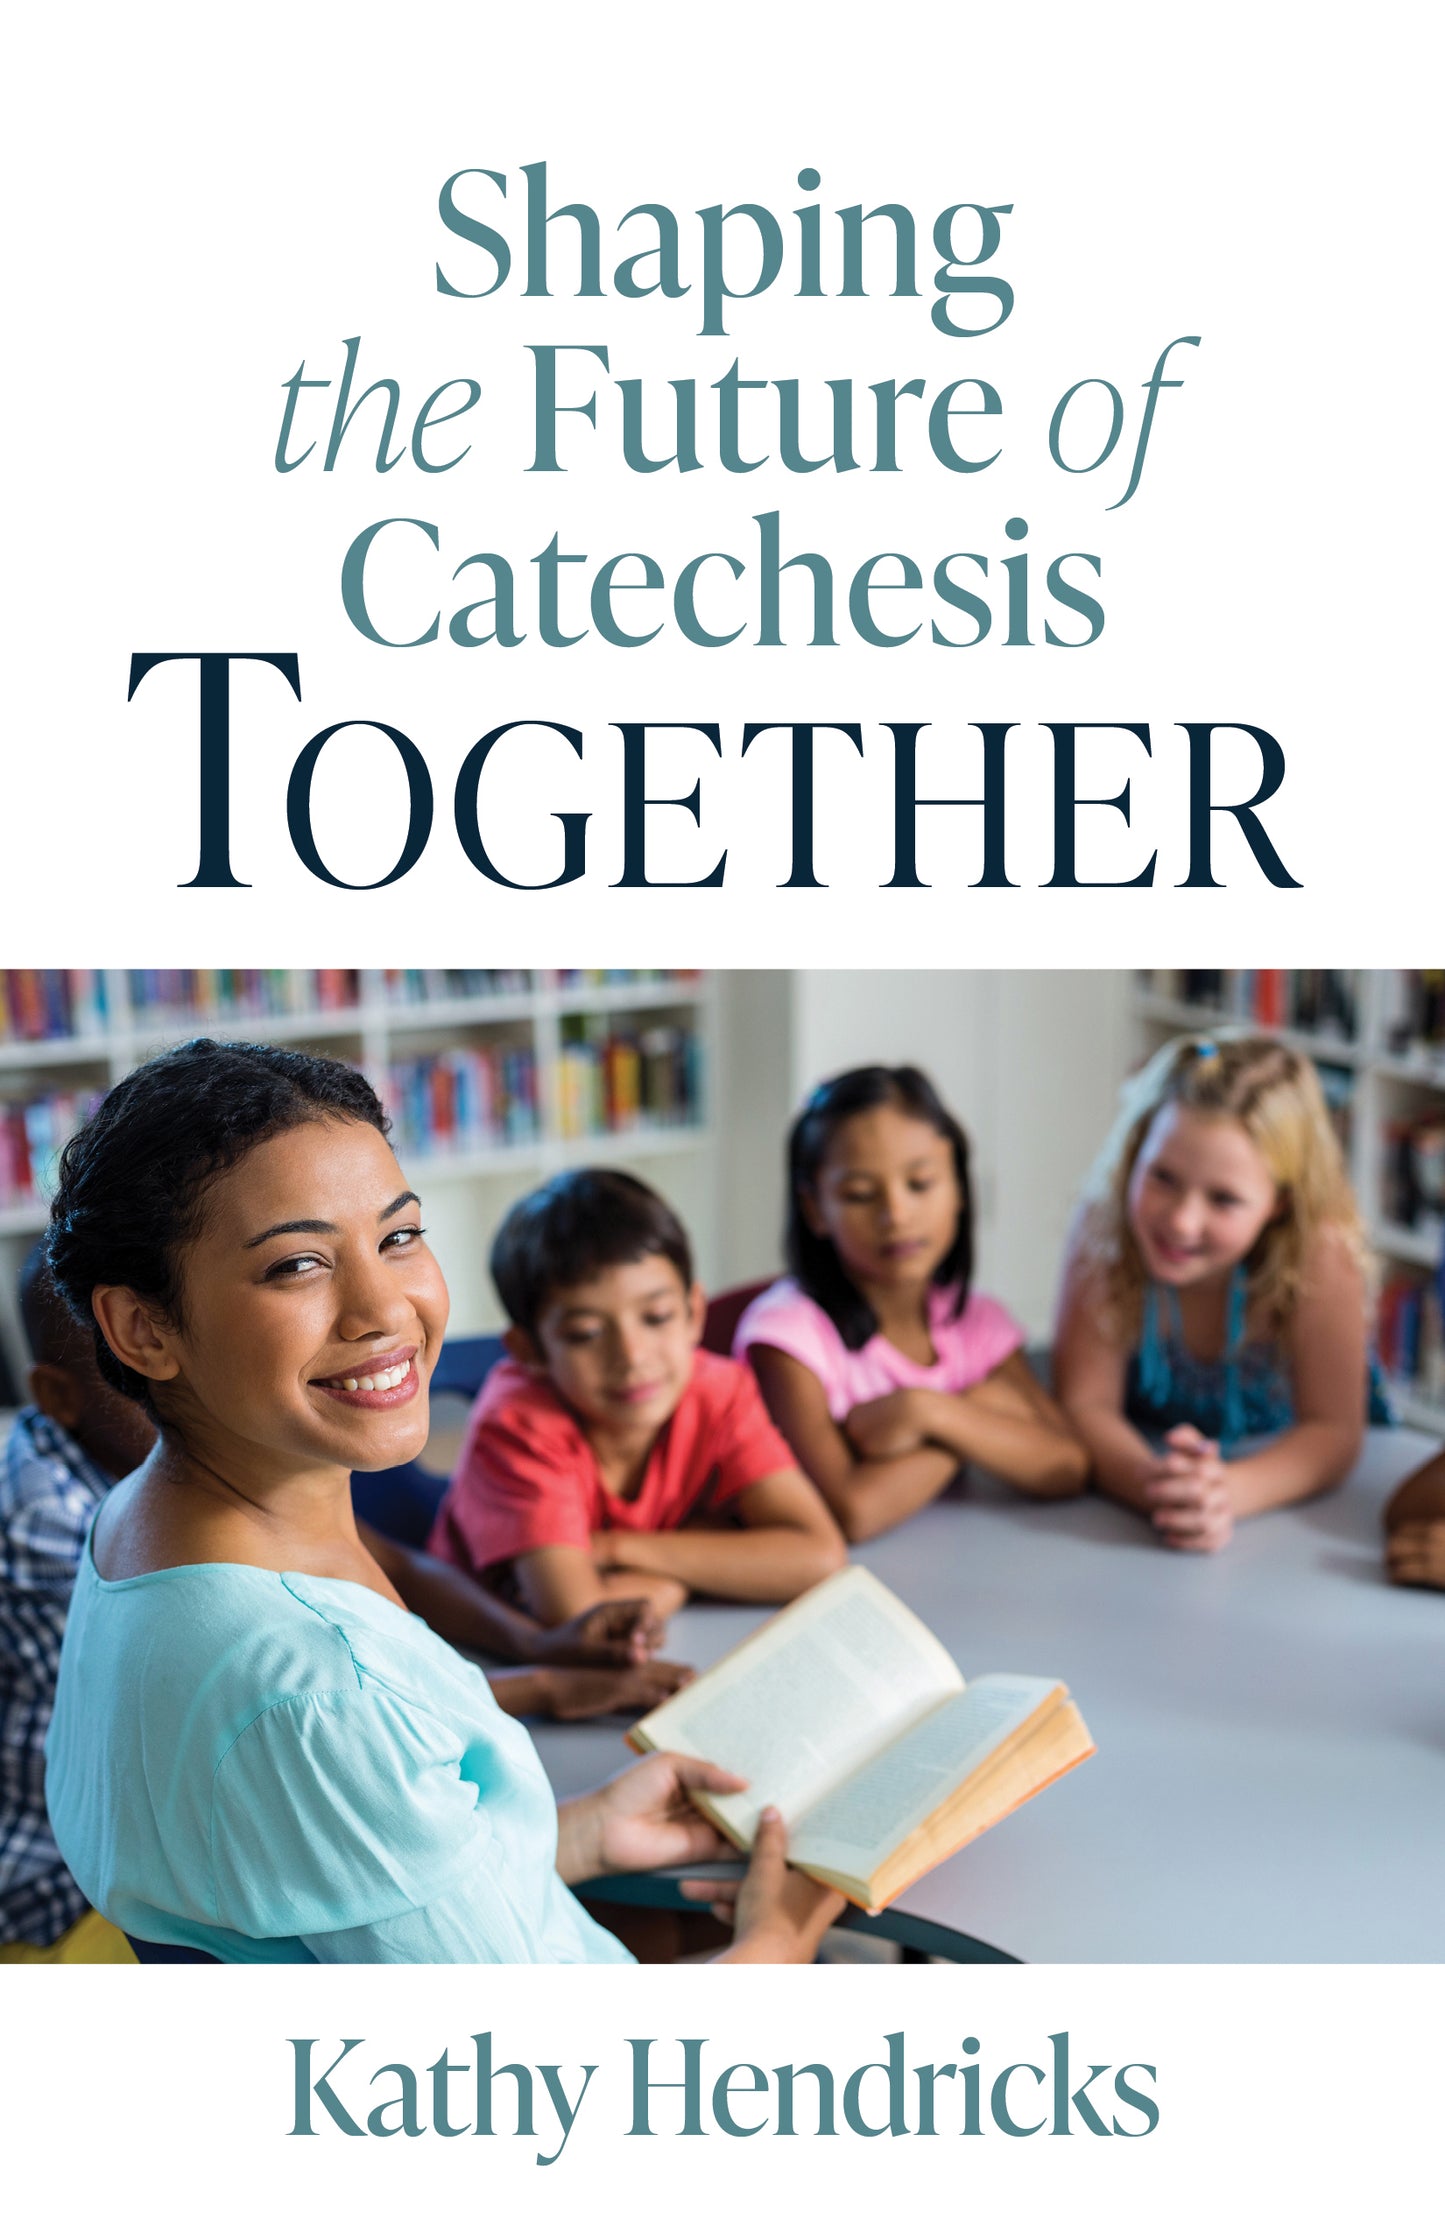 Shaping the Future of Catechesis Together